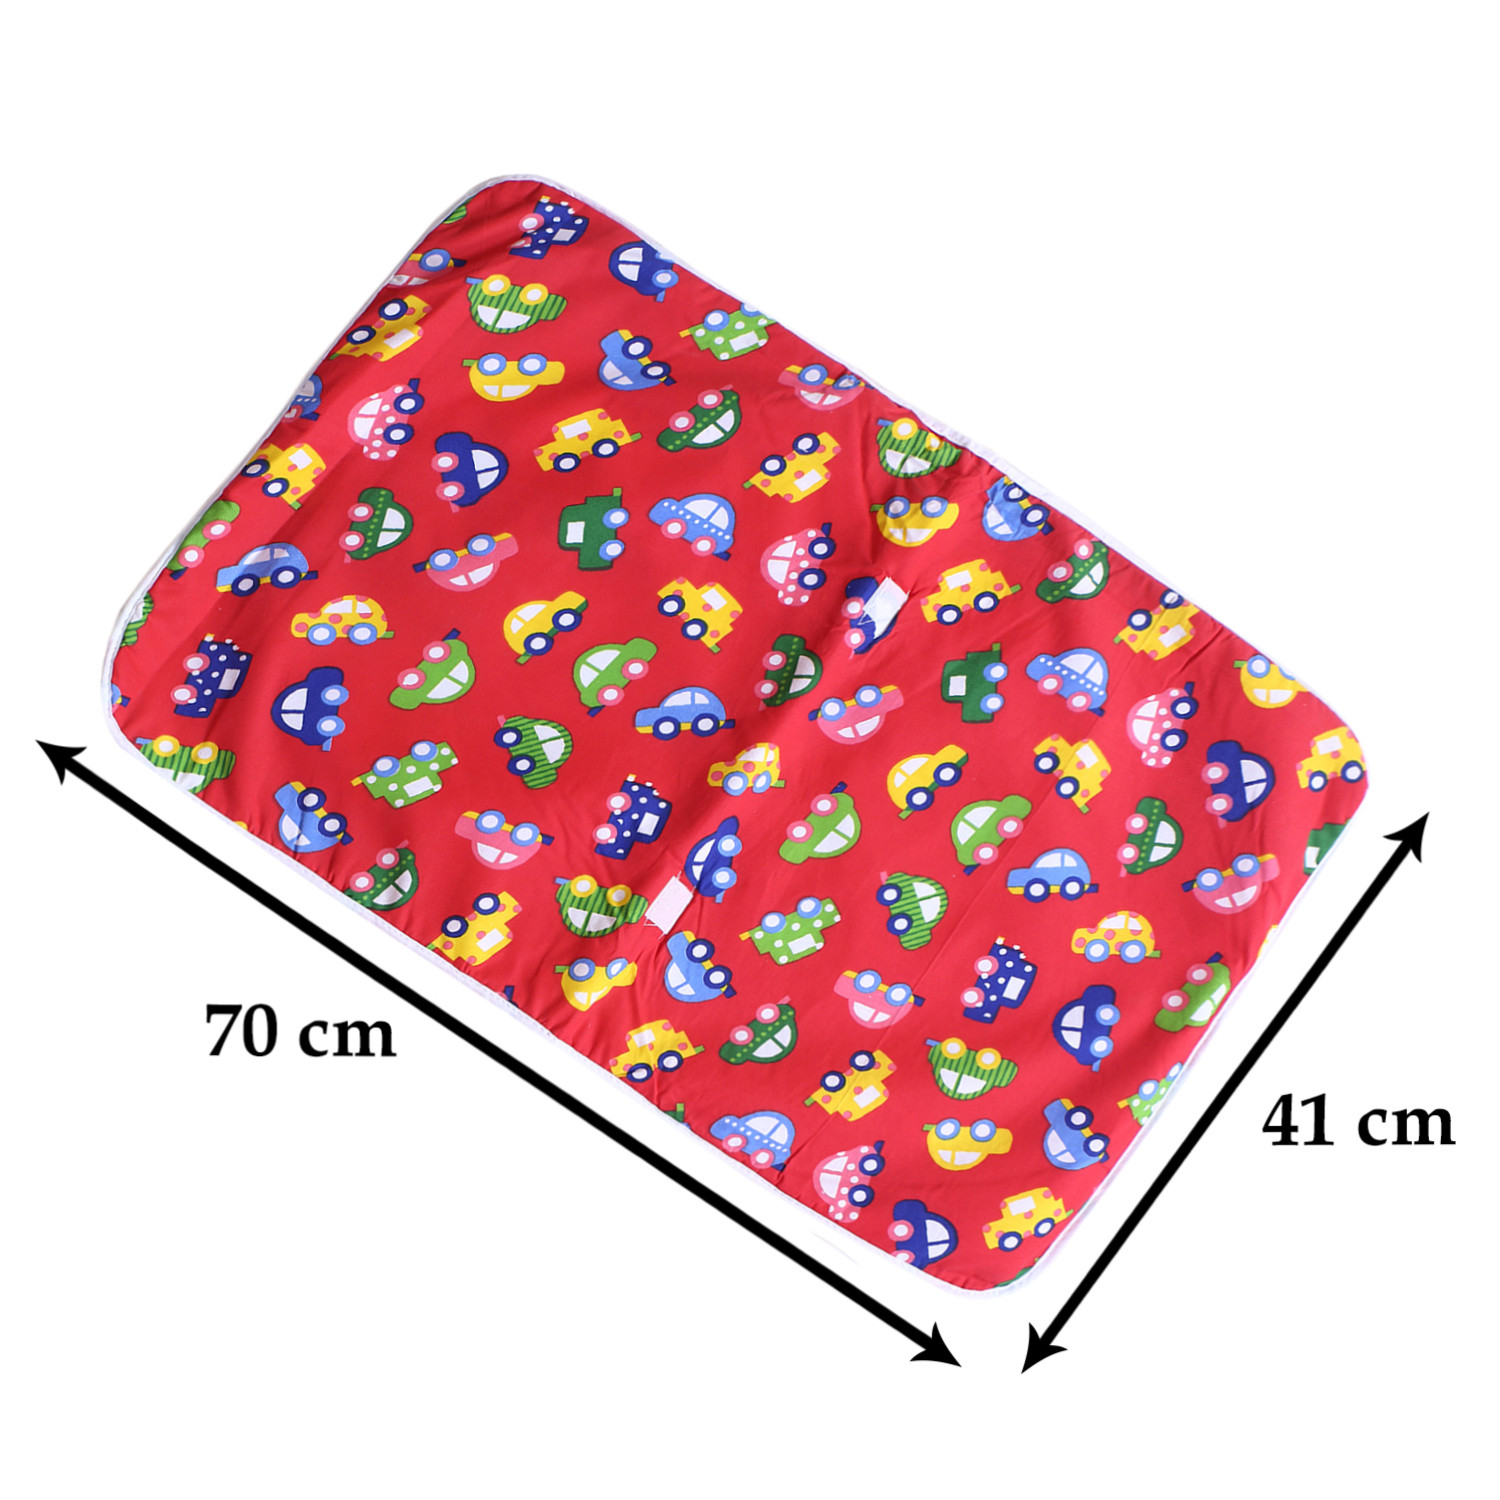 Kuber Industries Soft Cotton Car Print Mattress Crib Sheet/Baby sleeping Sheet/Bed With 3 Petch for Baby 24